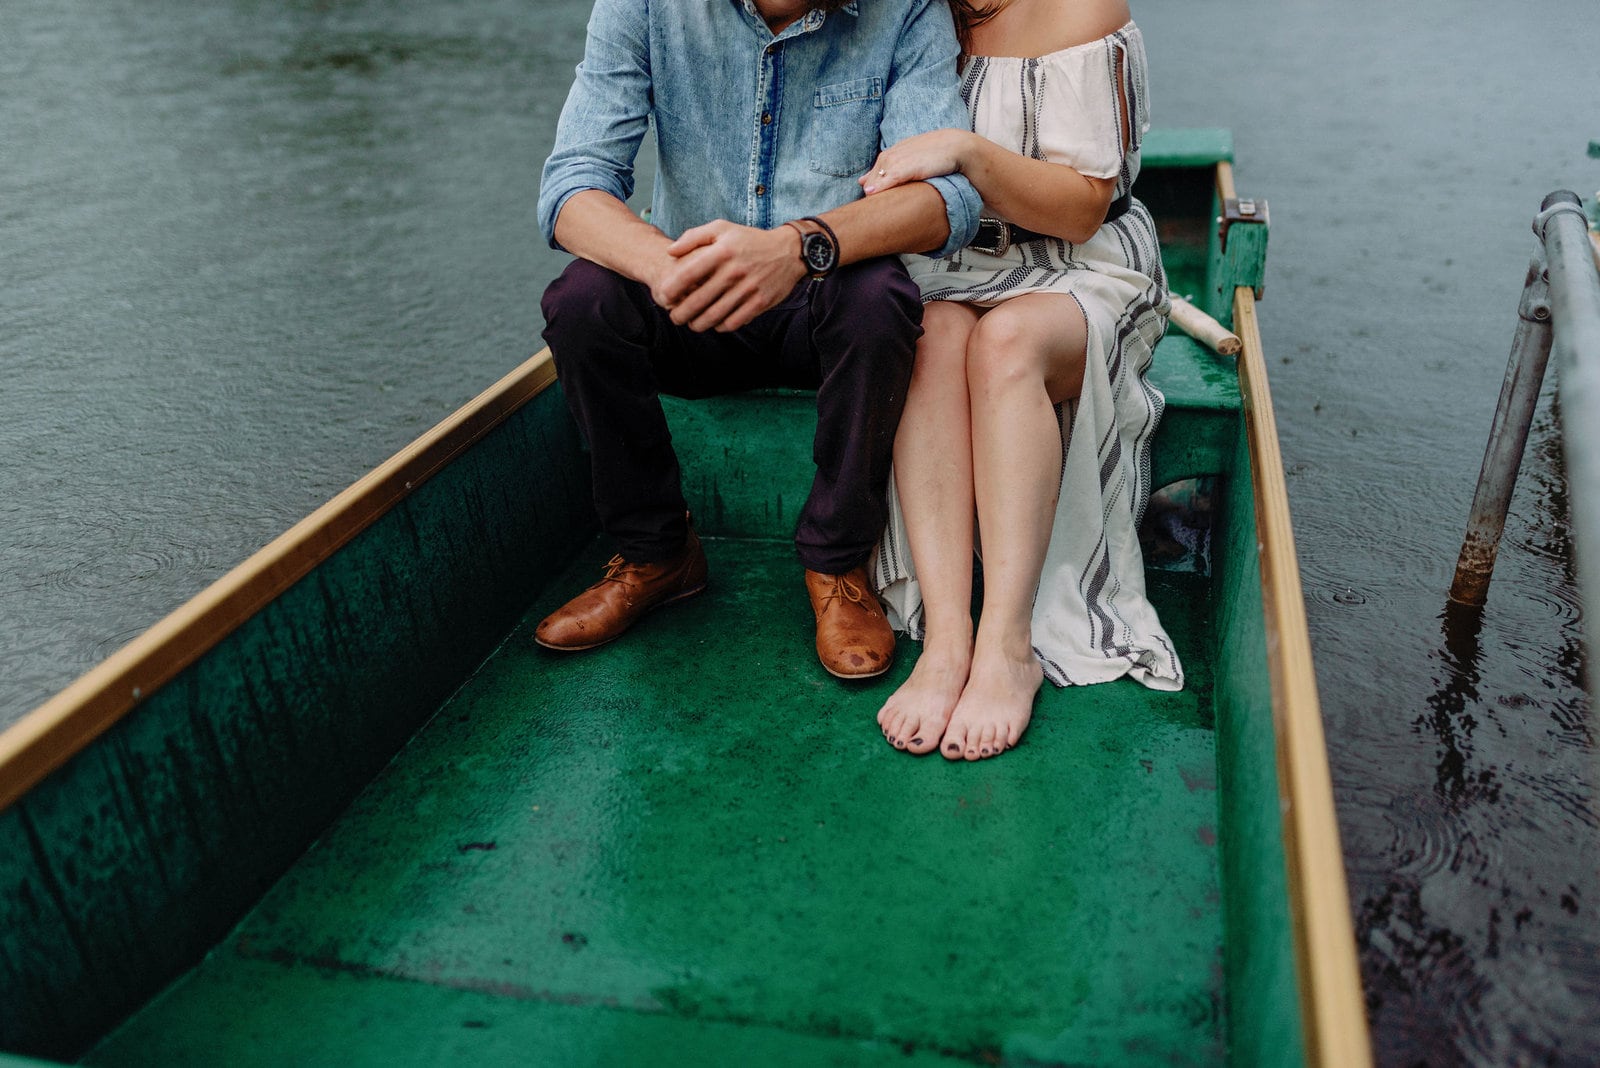 couple romantic embrace stormy engagement photos toronto jacqueline james photography rowboats the notebook storm clouds